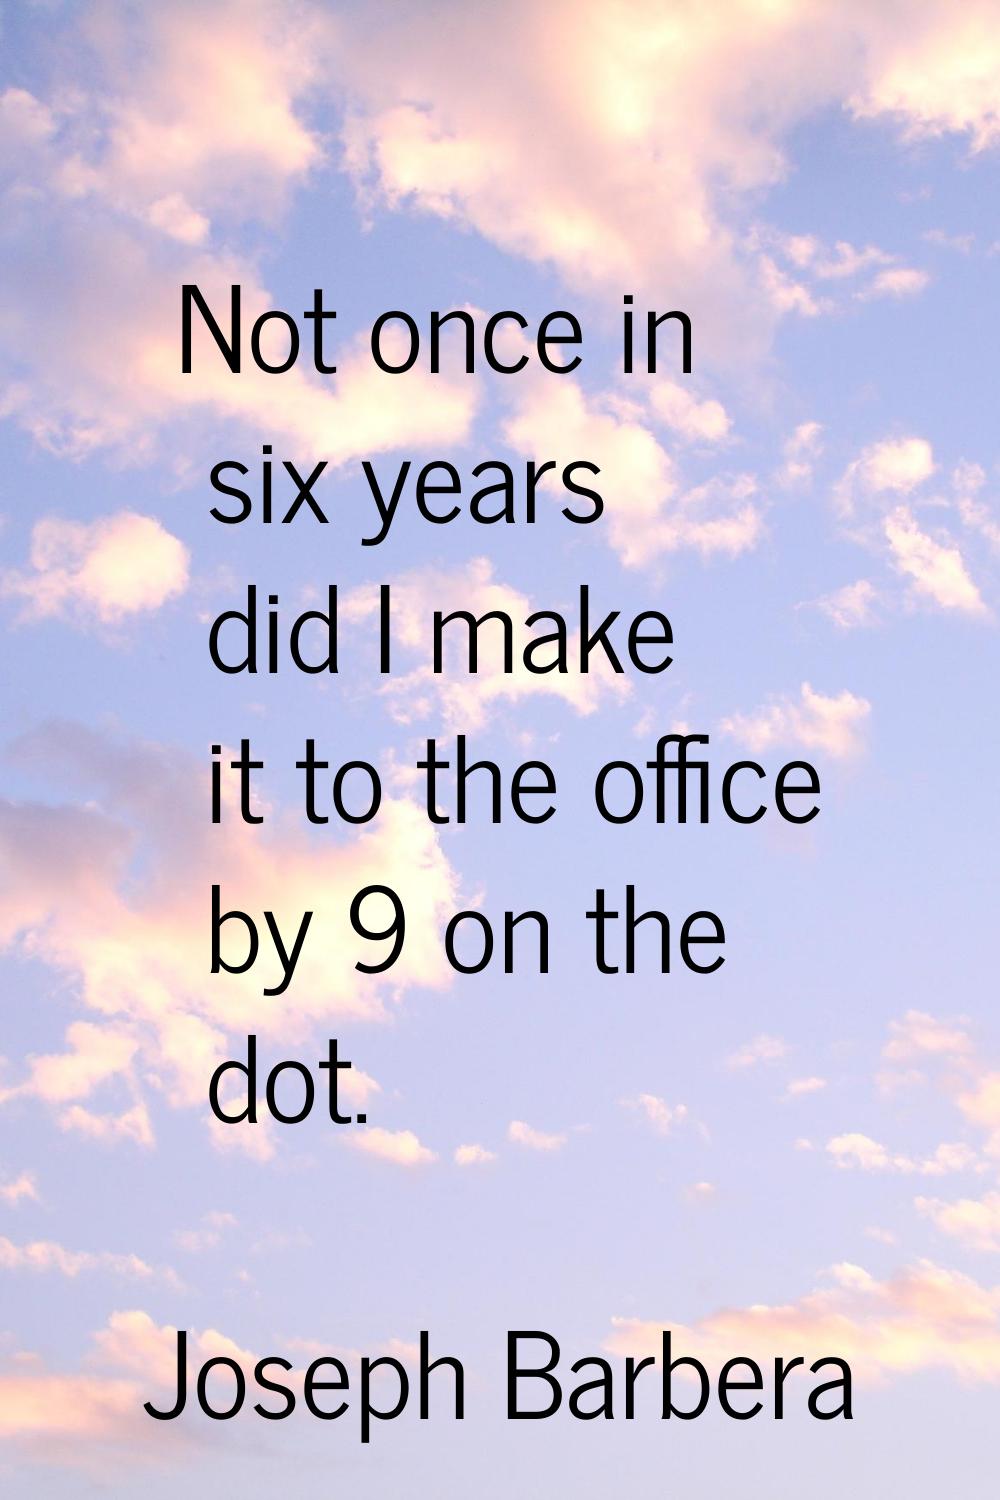 Not once in six years did I make it to the office by 9 on the dot.